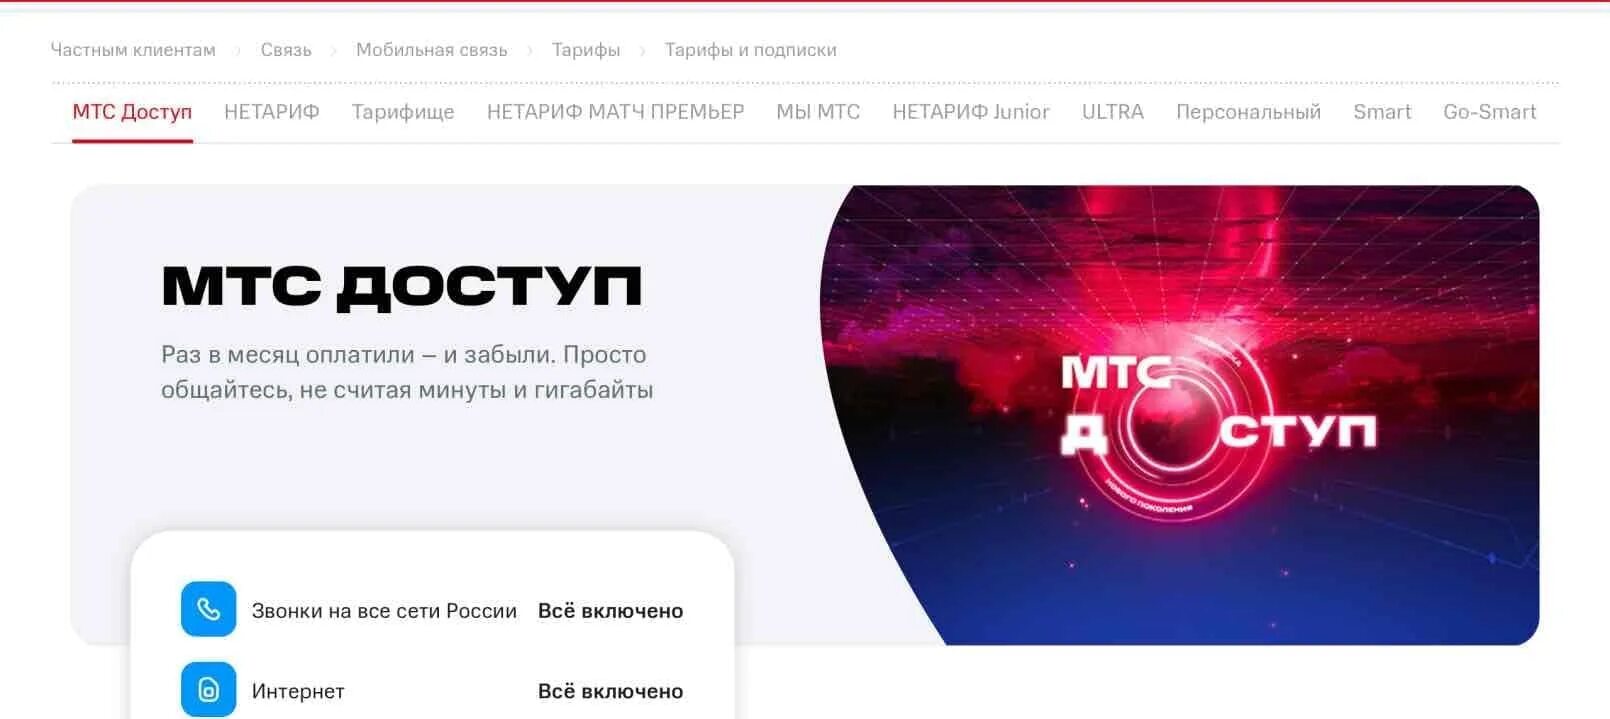 Mts payment steam. МТС доступ. МТС доступ реклама. МТС доступ тариф. Тариф МТС доступ описание тарифа.